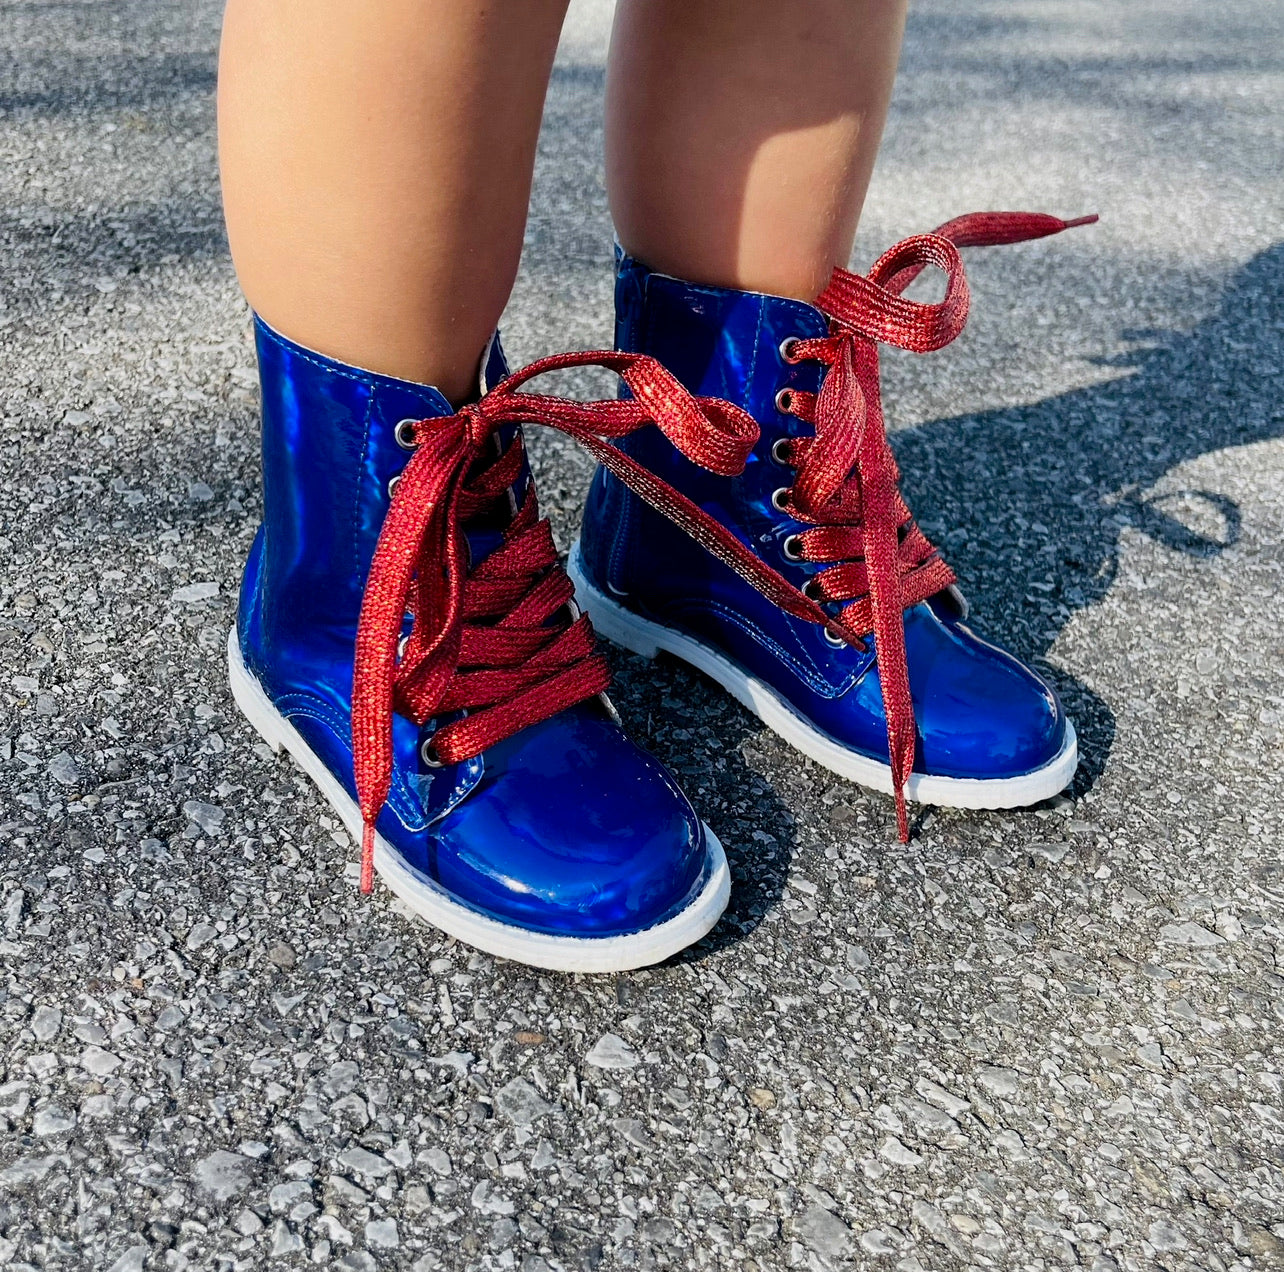 RTS Royal Blue Patent Combats Red Laces